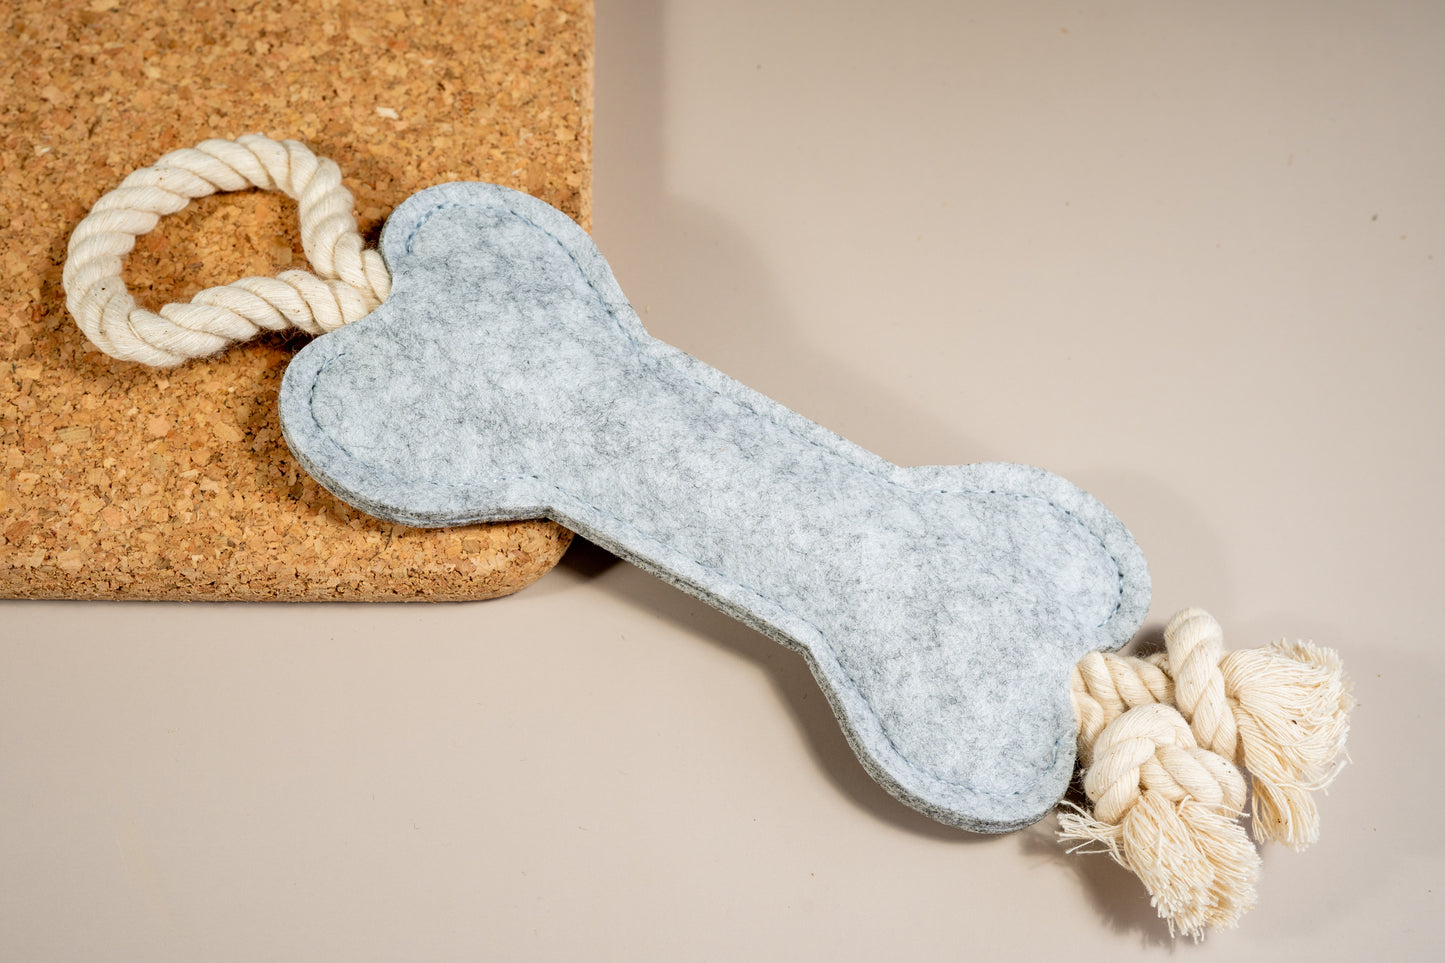 Pale gray felt bone dog toy with rope at the ends placed on a cork board.